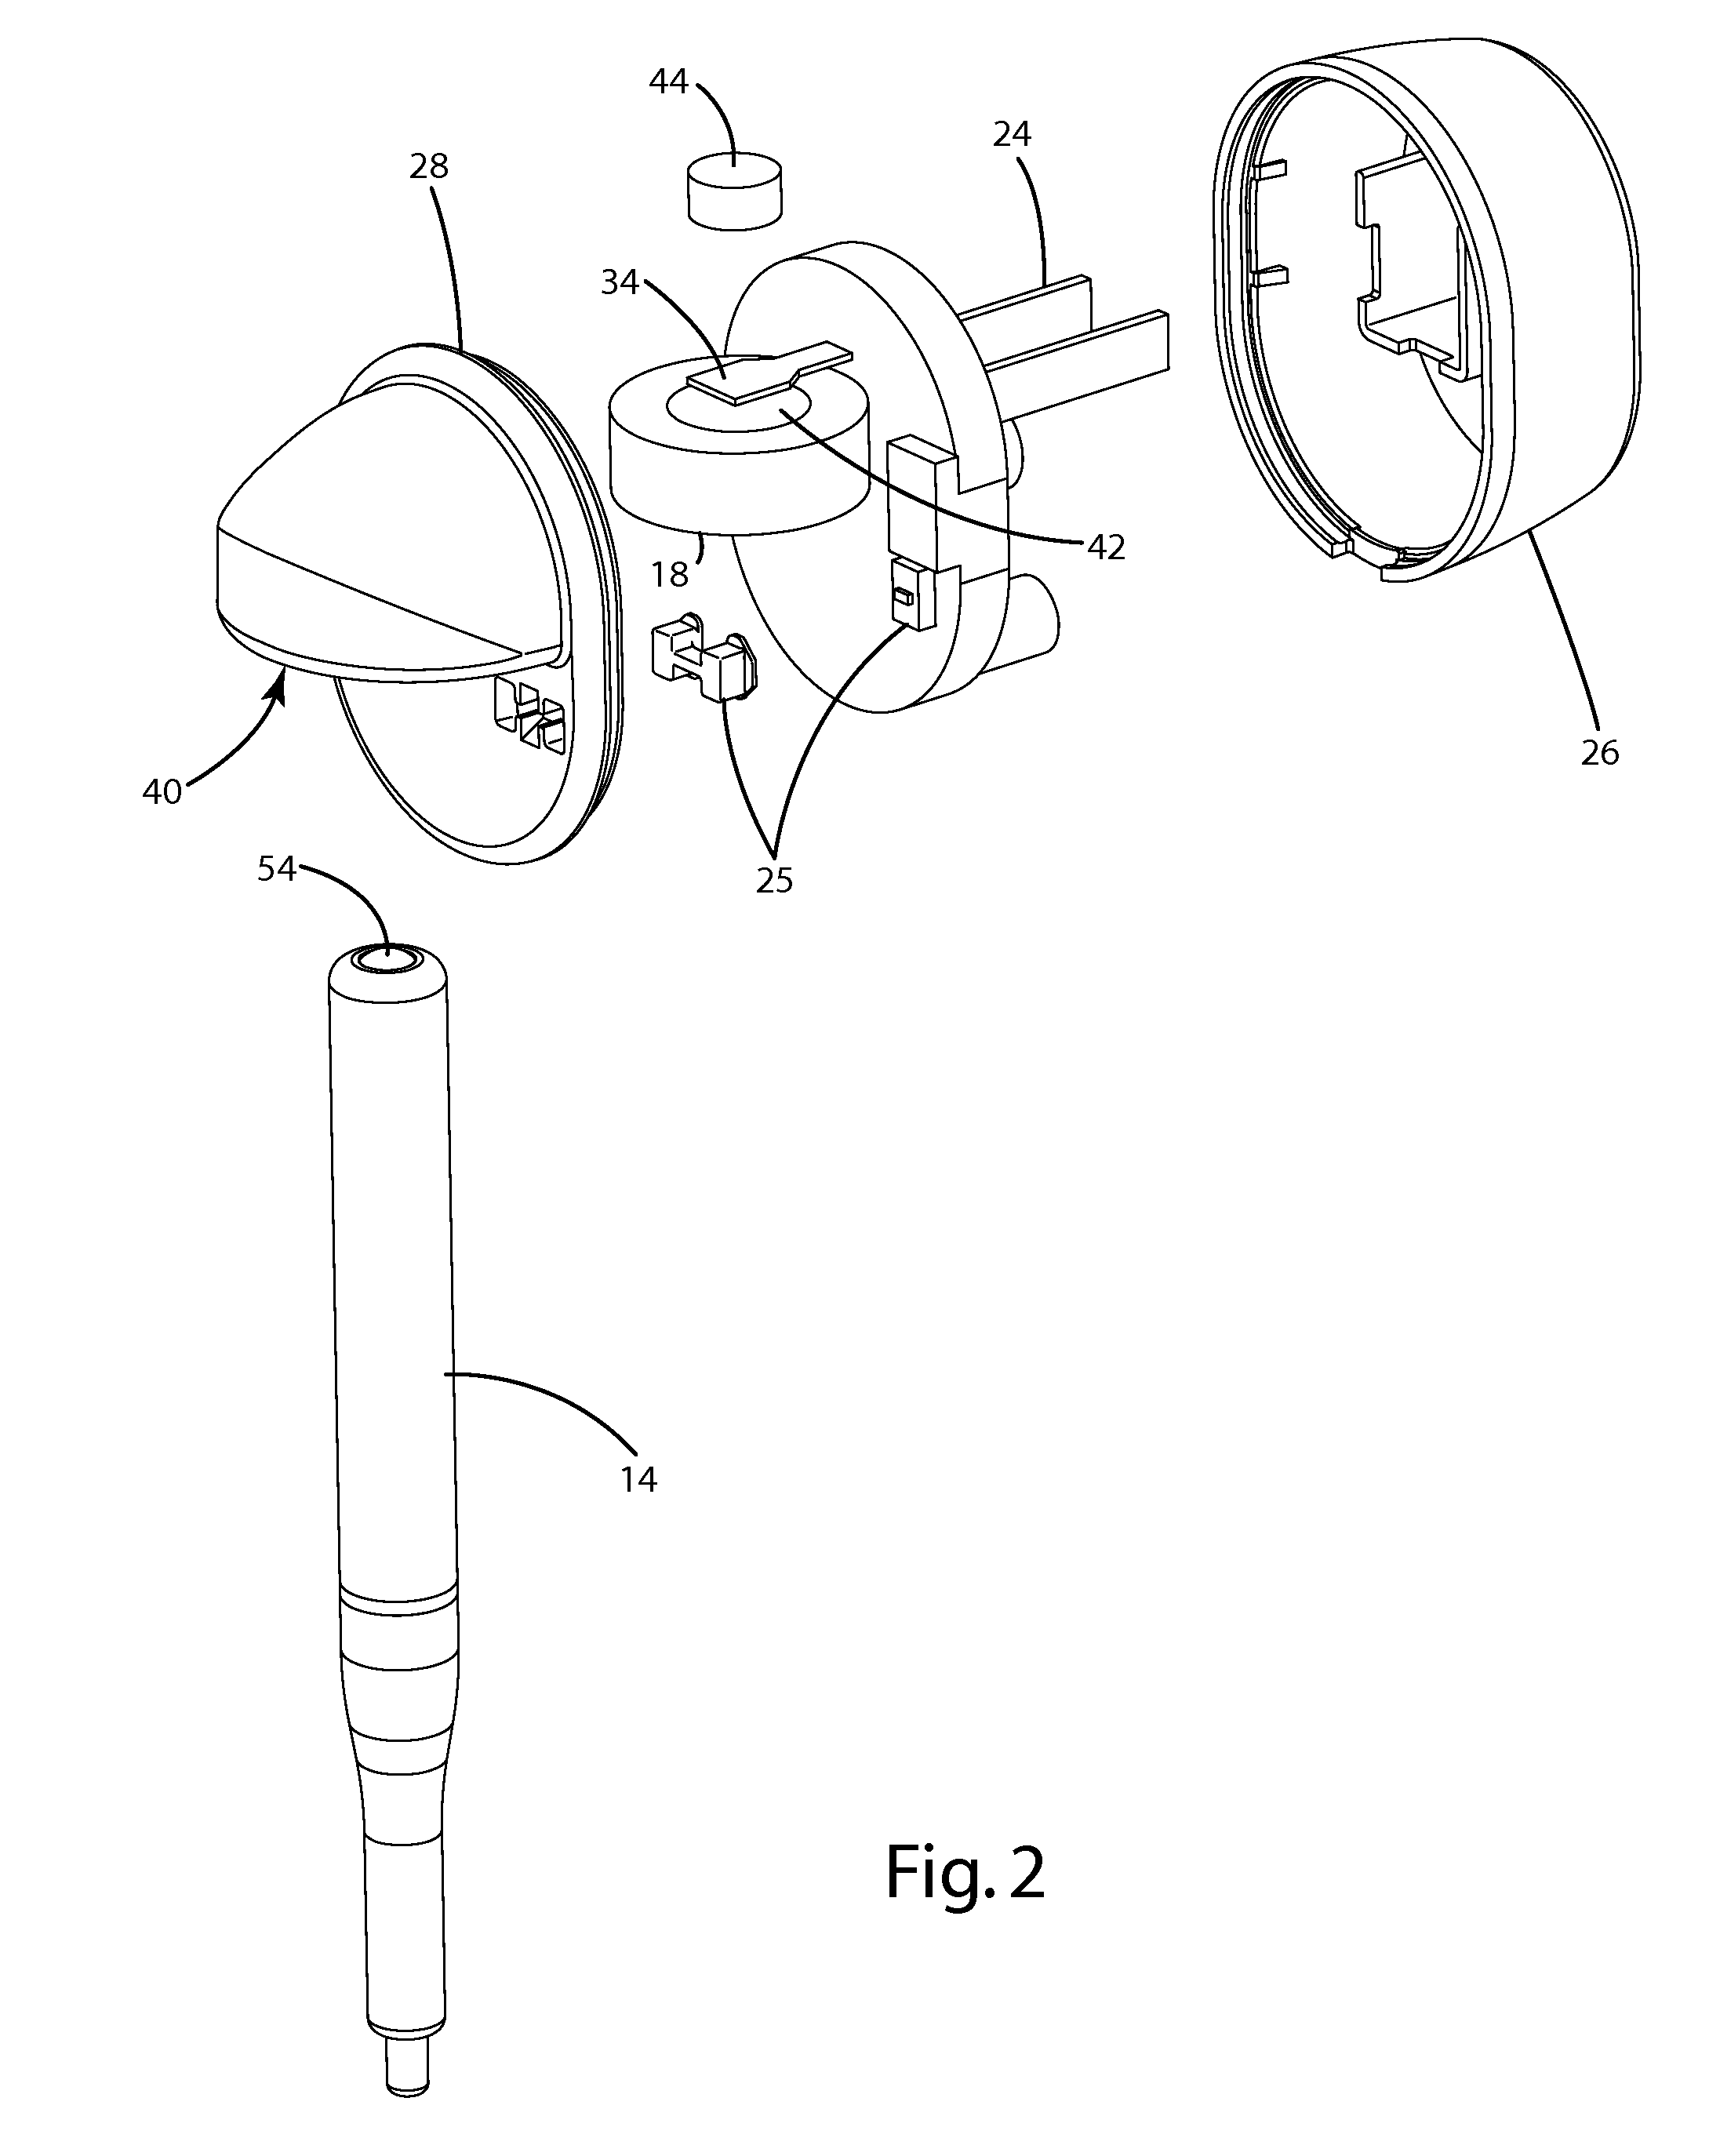 Inductively-heated applicator system